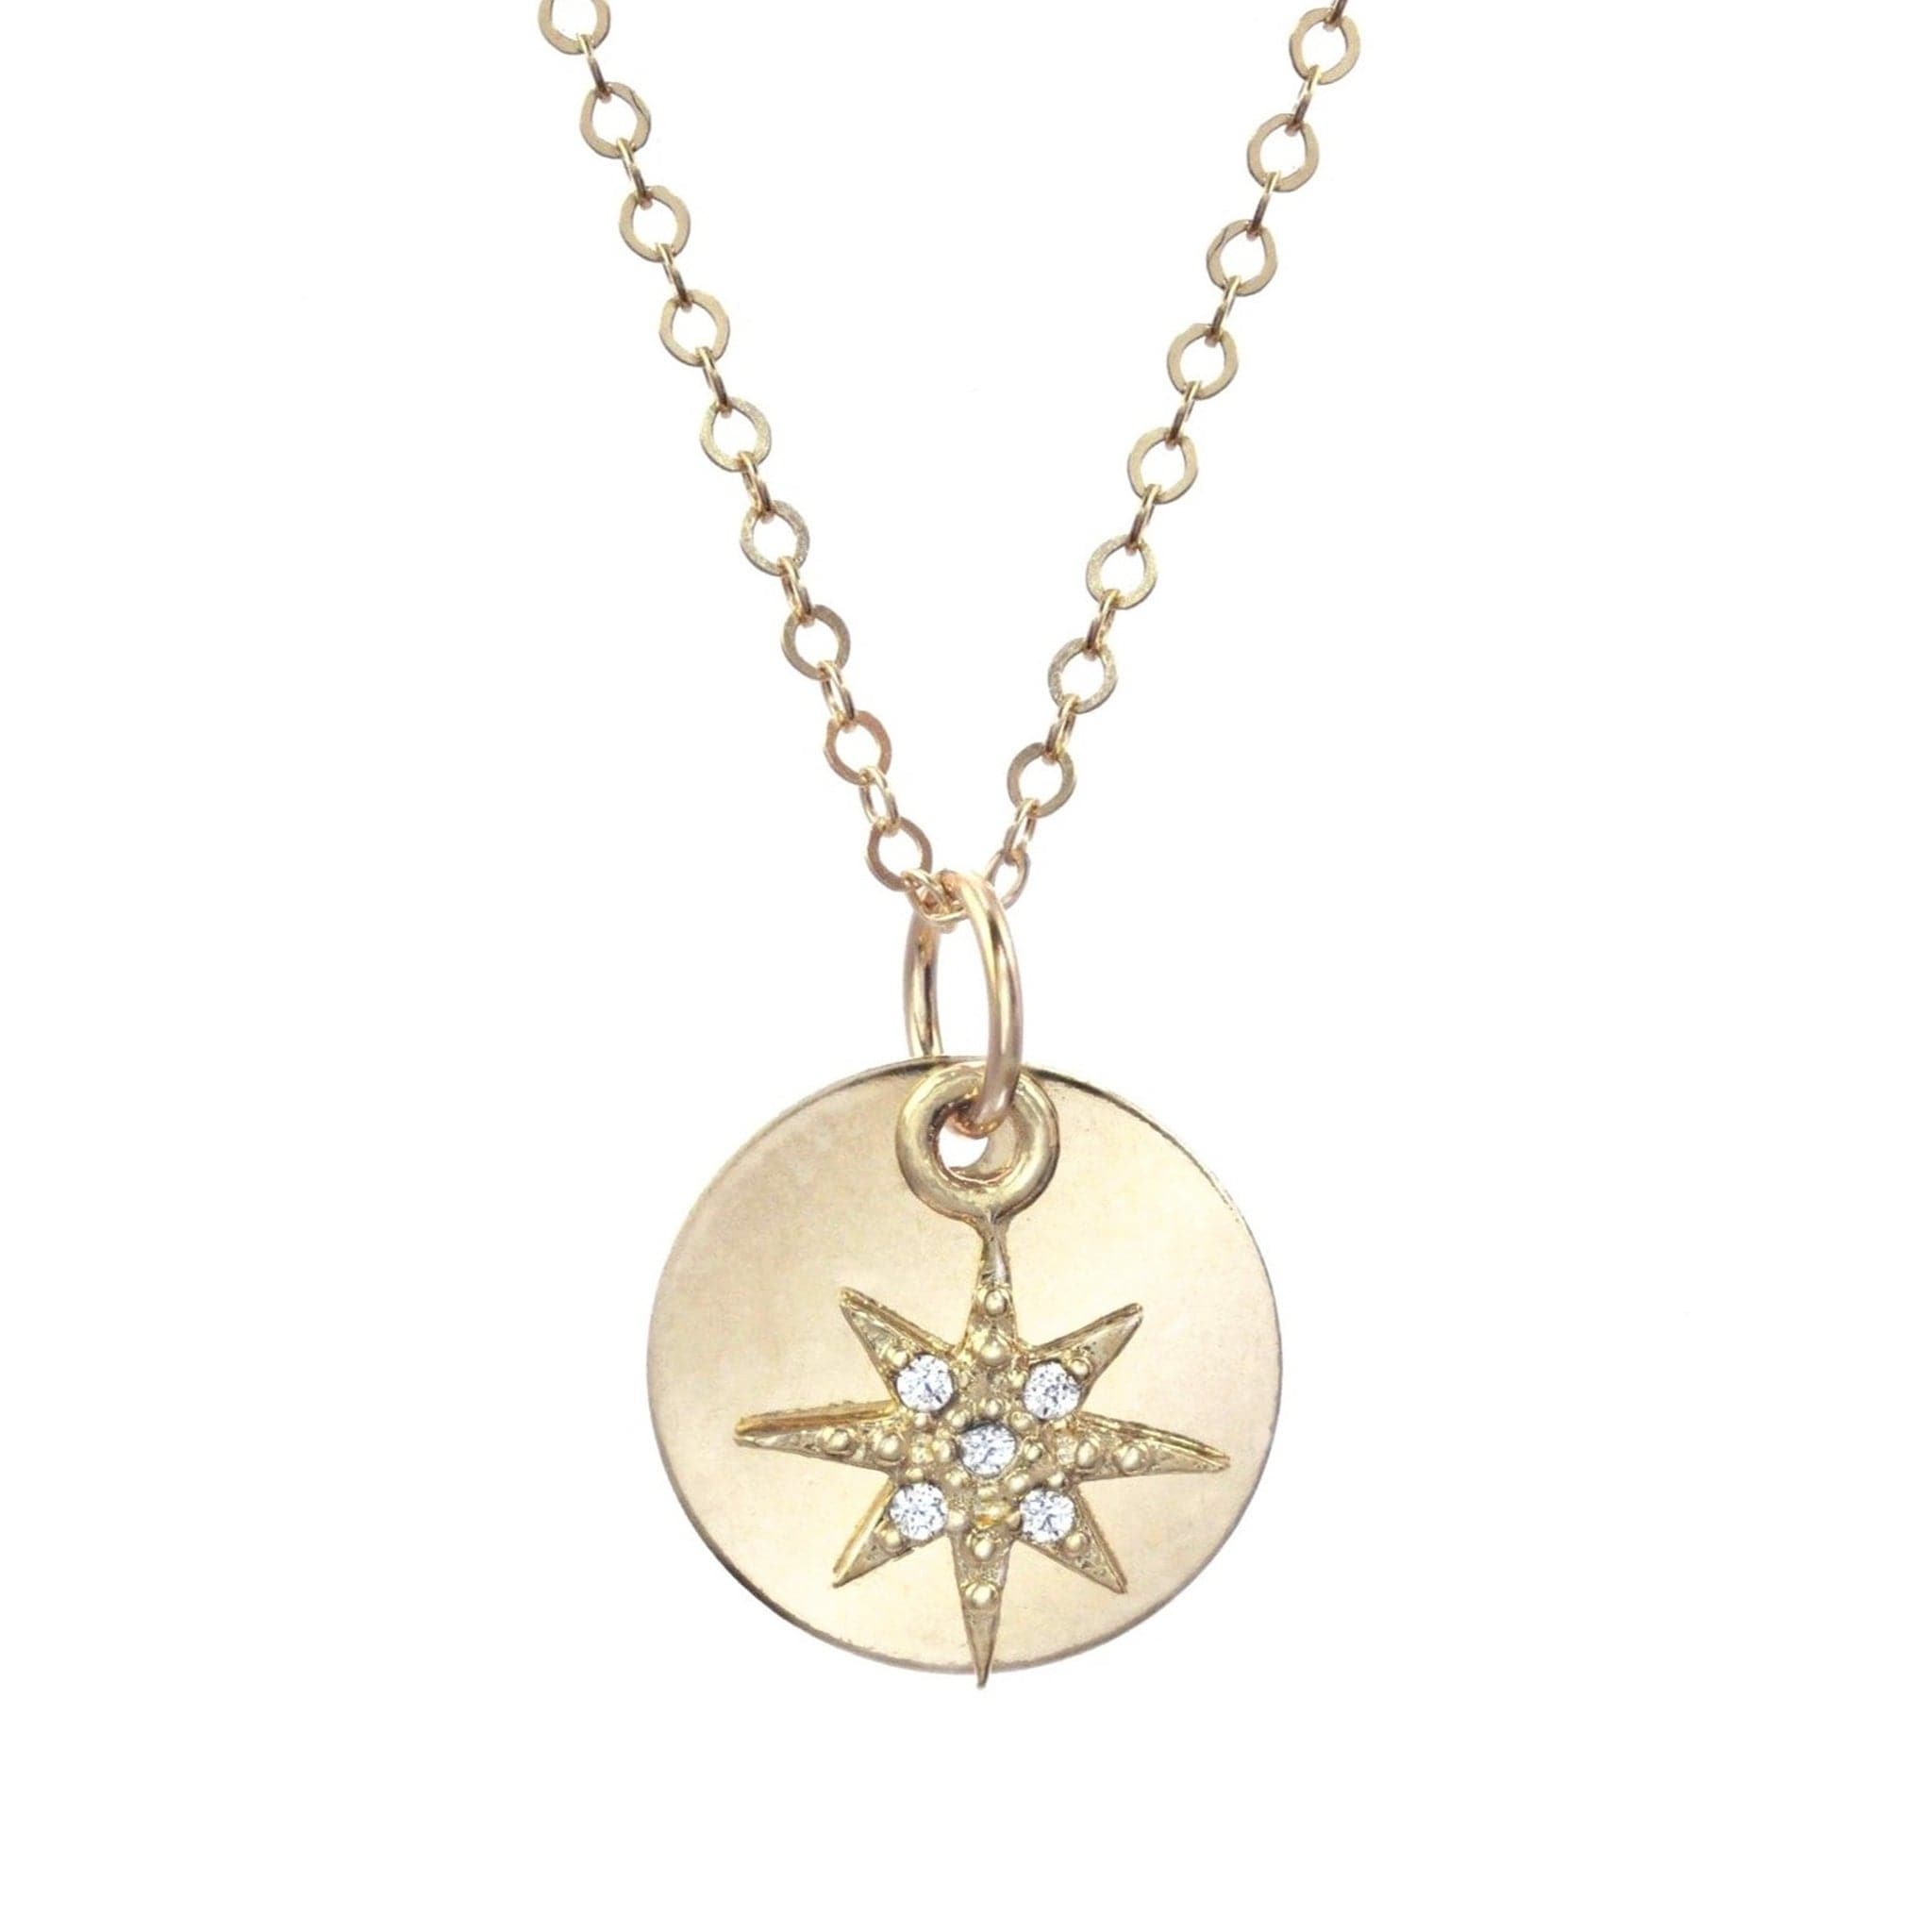 Long gold chain and circle gold pendant with crystal gemmed star charm.